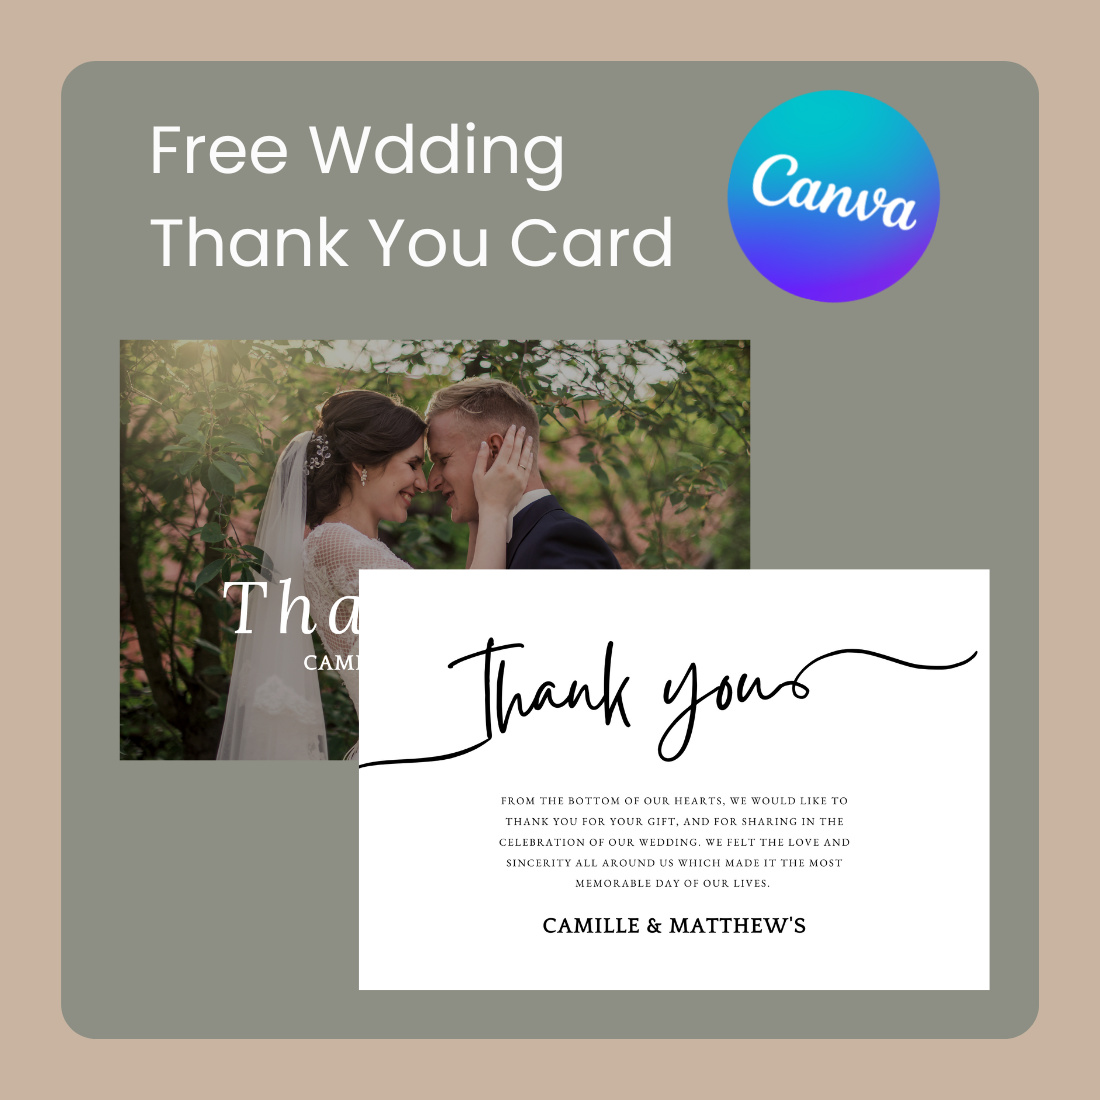 Modern and Simple Wedding Invitations - Free Thank You Cards cover image.